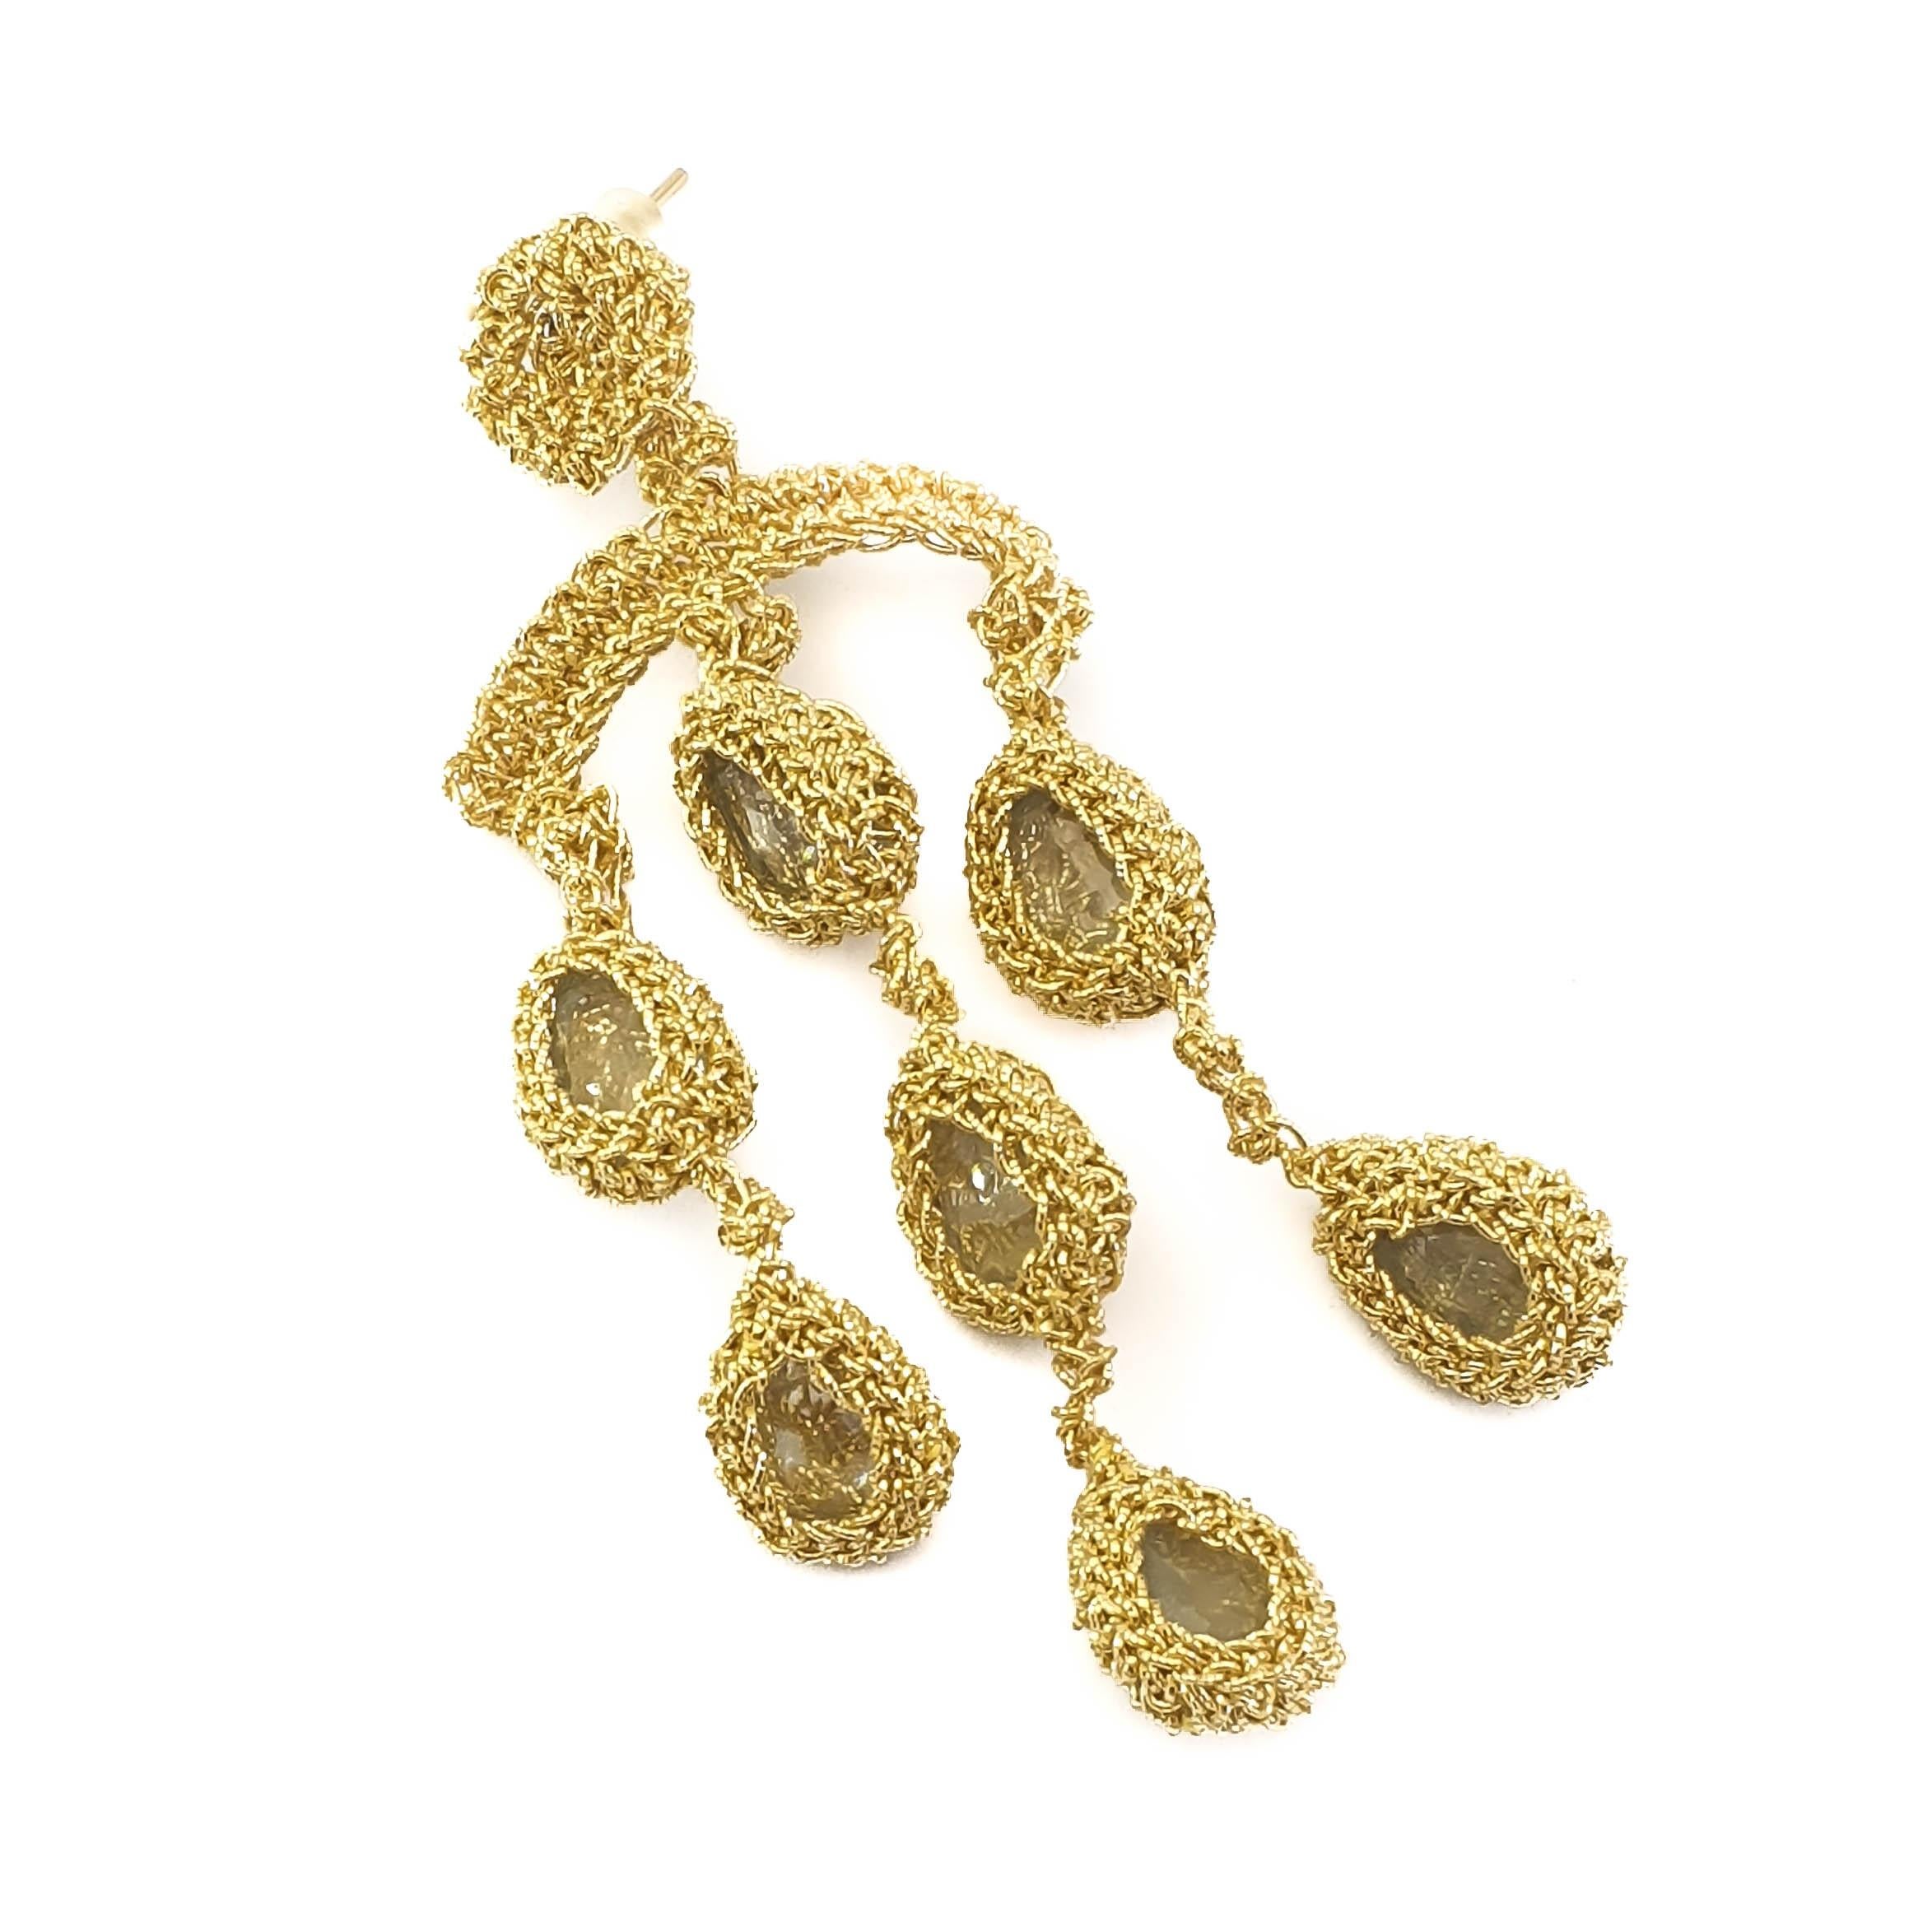 One of a Kind 18 karat gold crochet thread with 7 pear shape Aquamarines Chandelier 
earrings. Earrings are hand crochet by the artist. The gold thread is tightly crochet around the Aquamarines. The earring post is crochet with the gold thread.